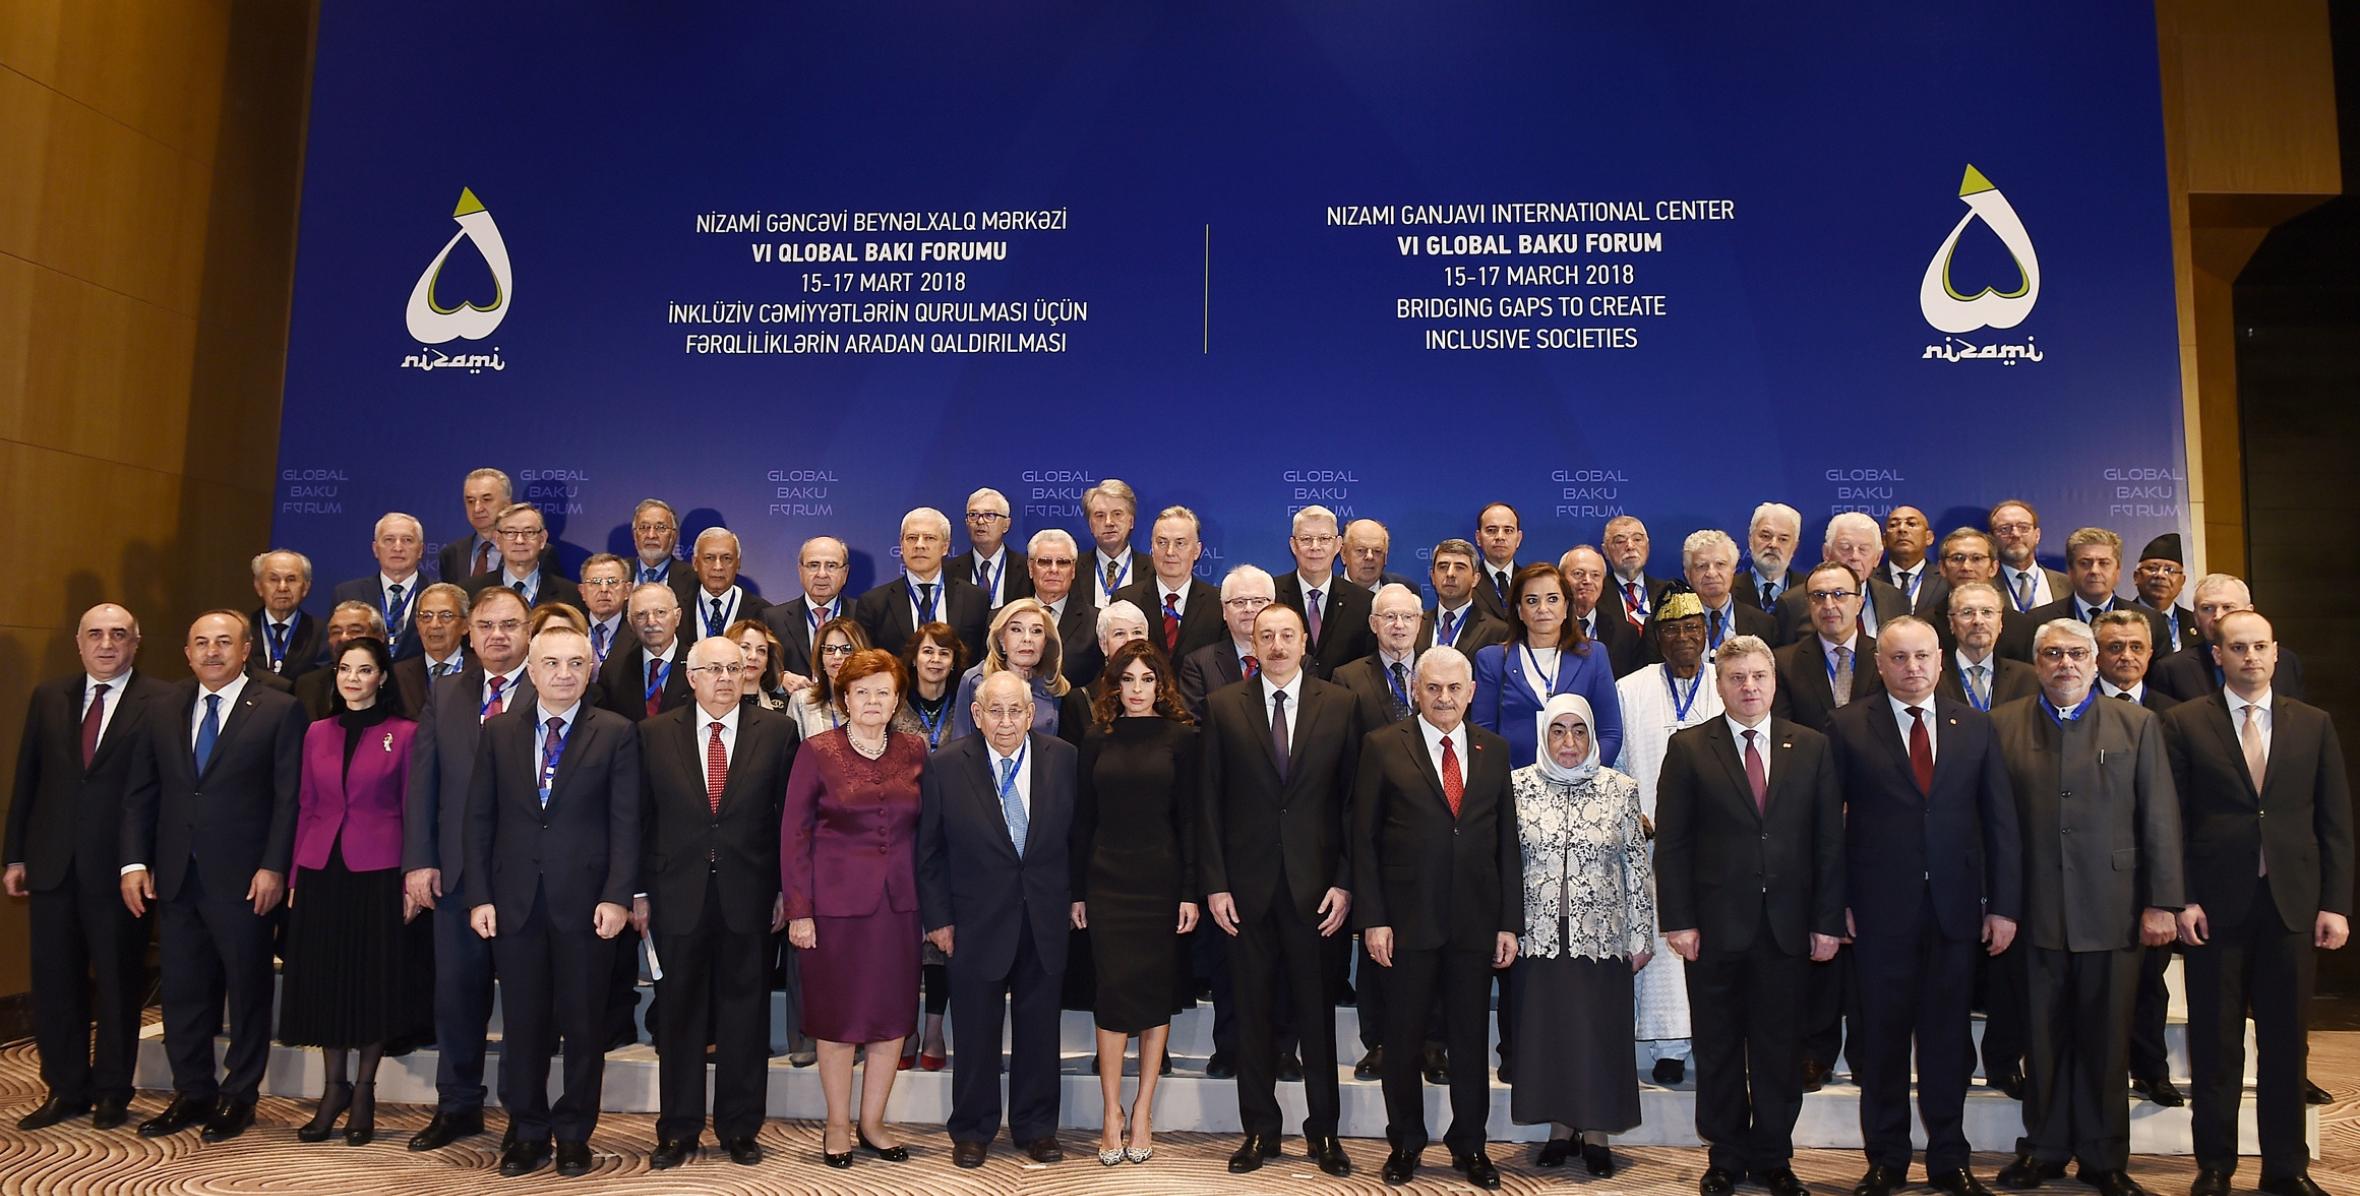 Ilham Aliyev attends opening ceremony of the 6th Global Baku Forum